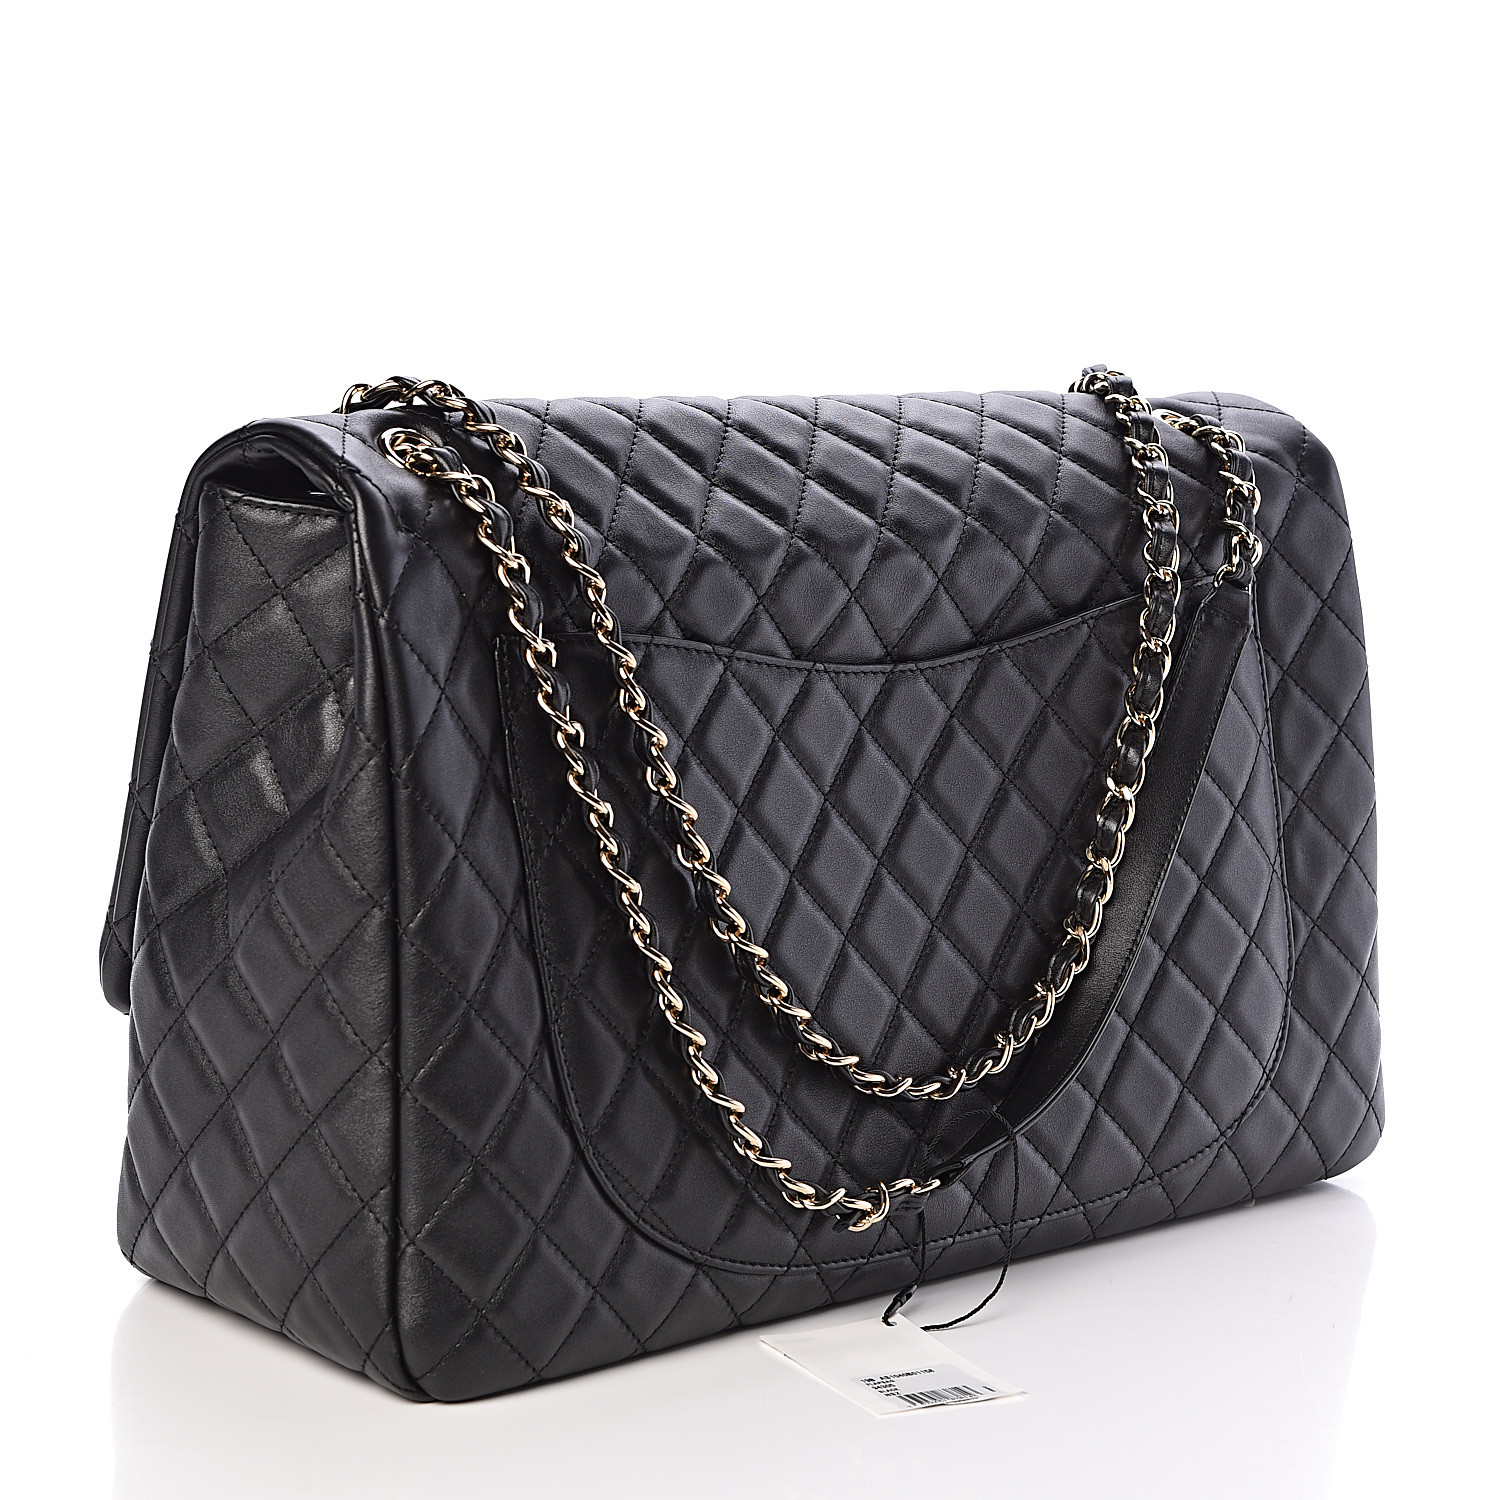 CHANEL Metallized Calfskin Quilted XXL Travel Flap Bag Black 478891